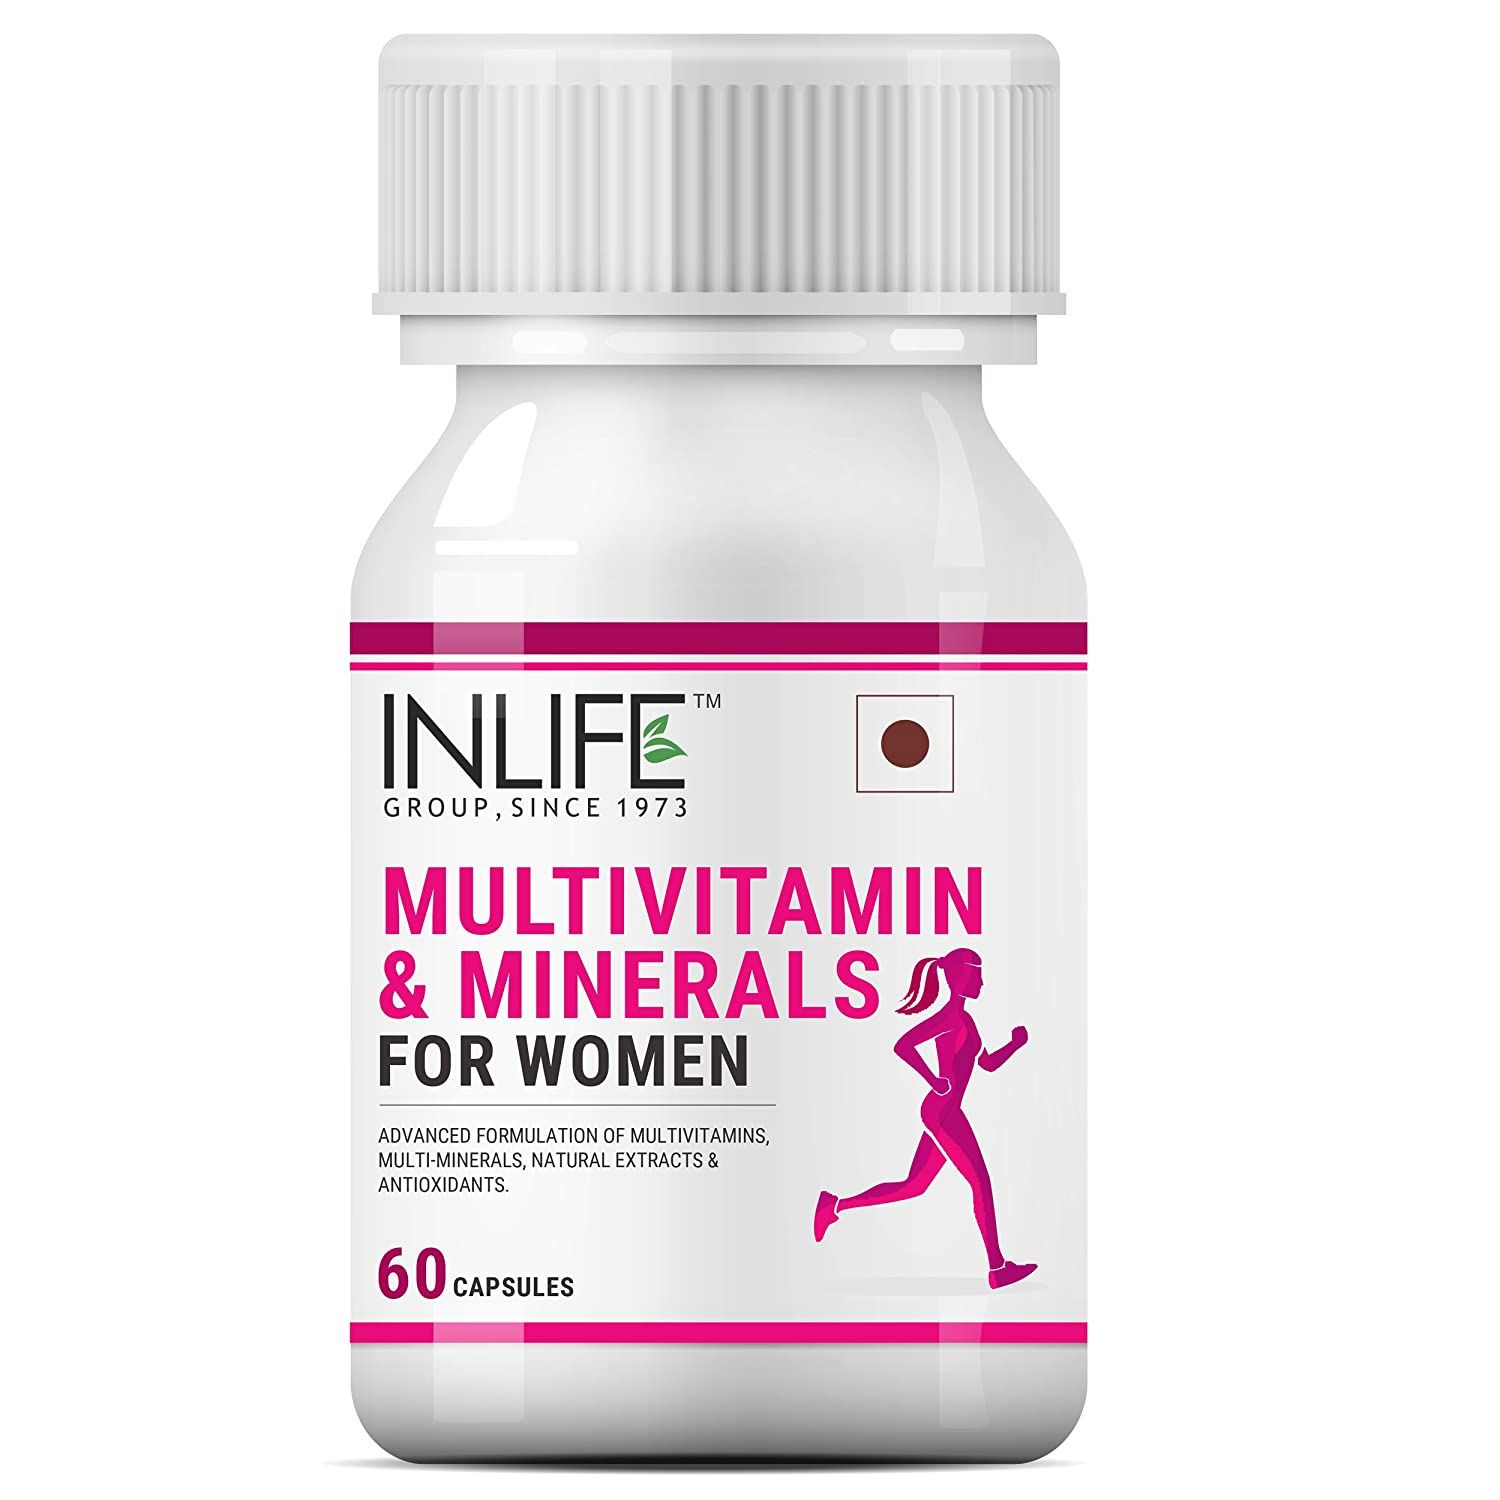 Inlife Multivitamin & Minerals For Women Image